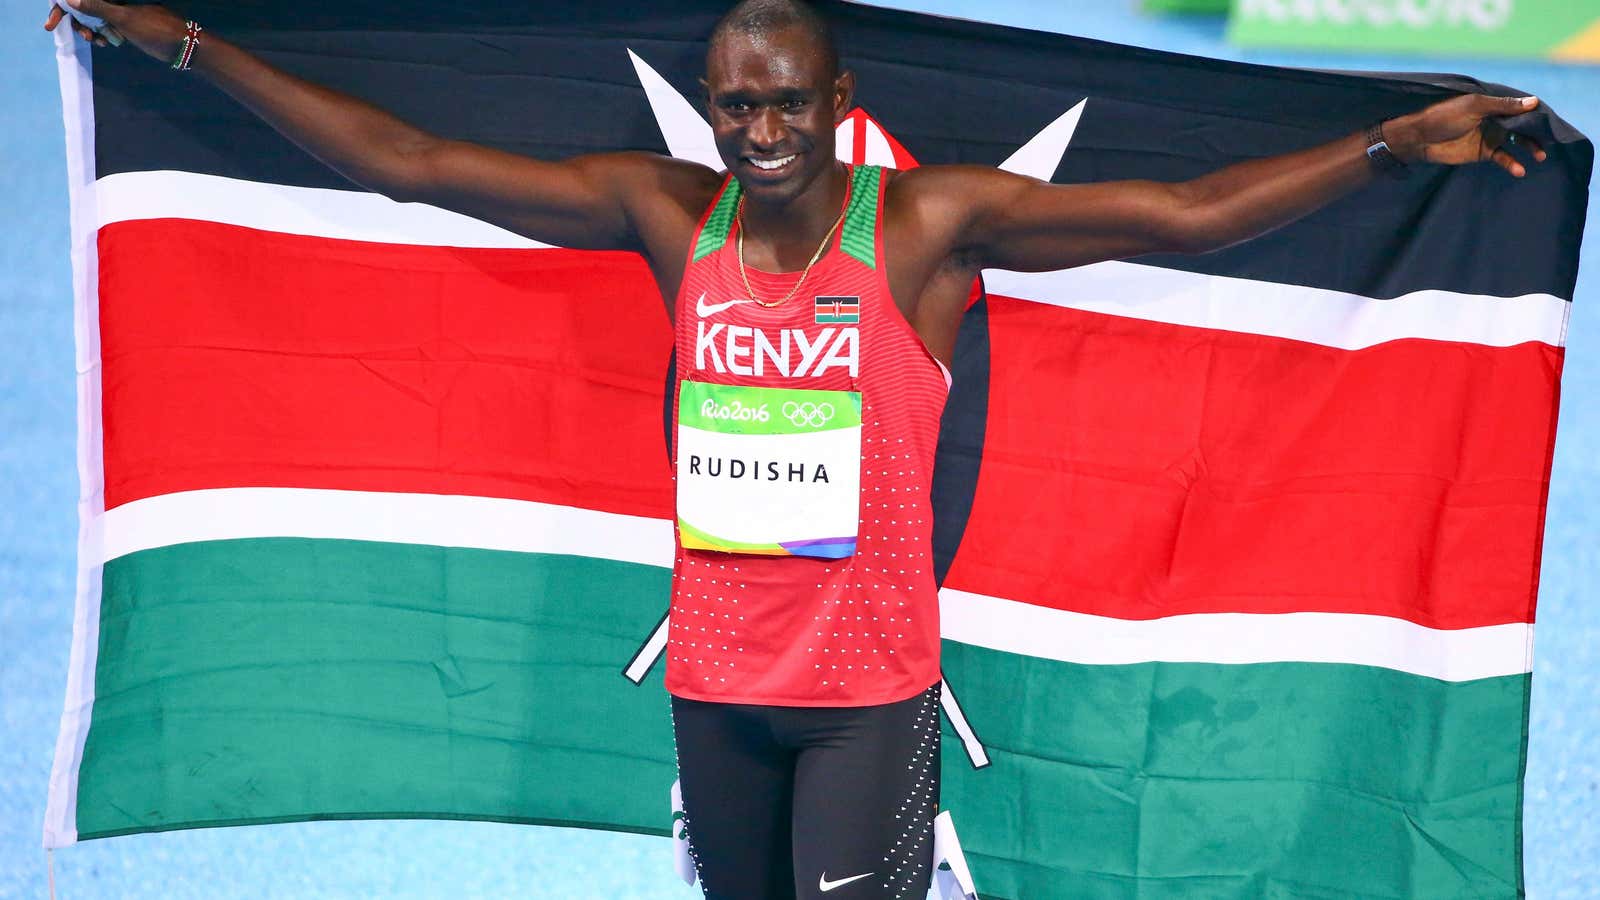 Kenya was ranked 15 globally and won 13 medals.